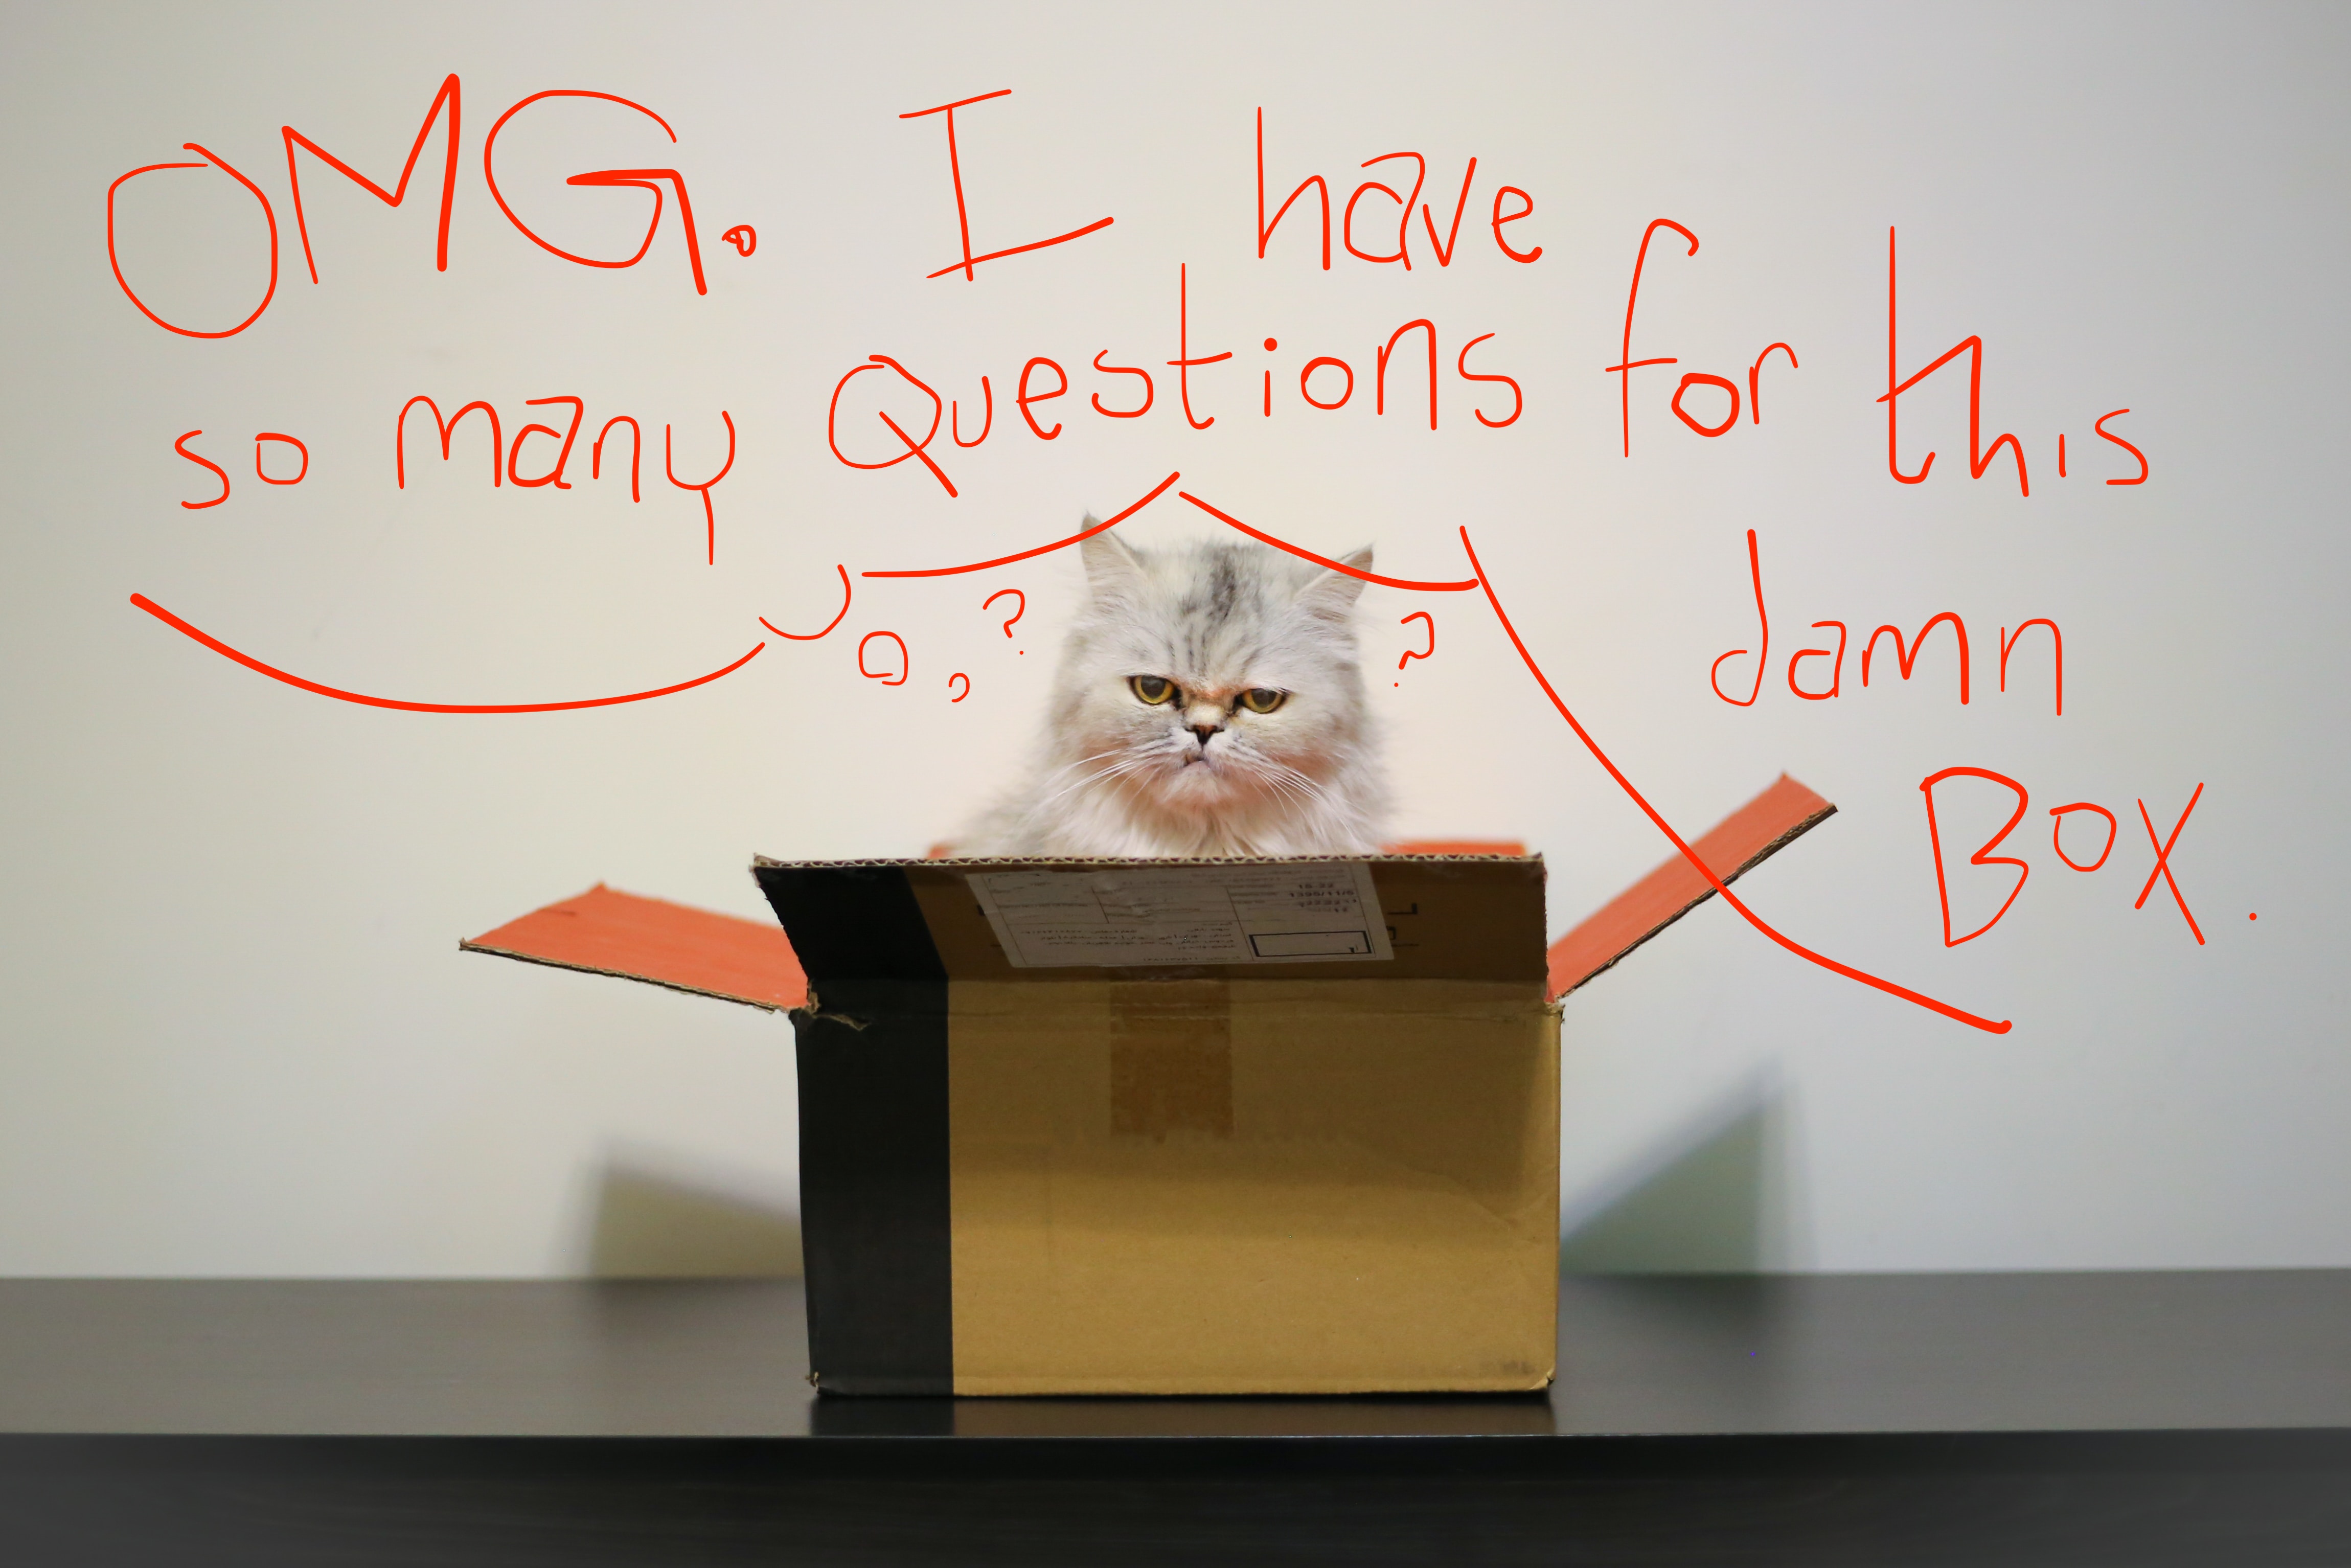 cat in a box, thinking
'OMG I have so many questions for this damn box'
